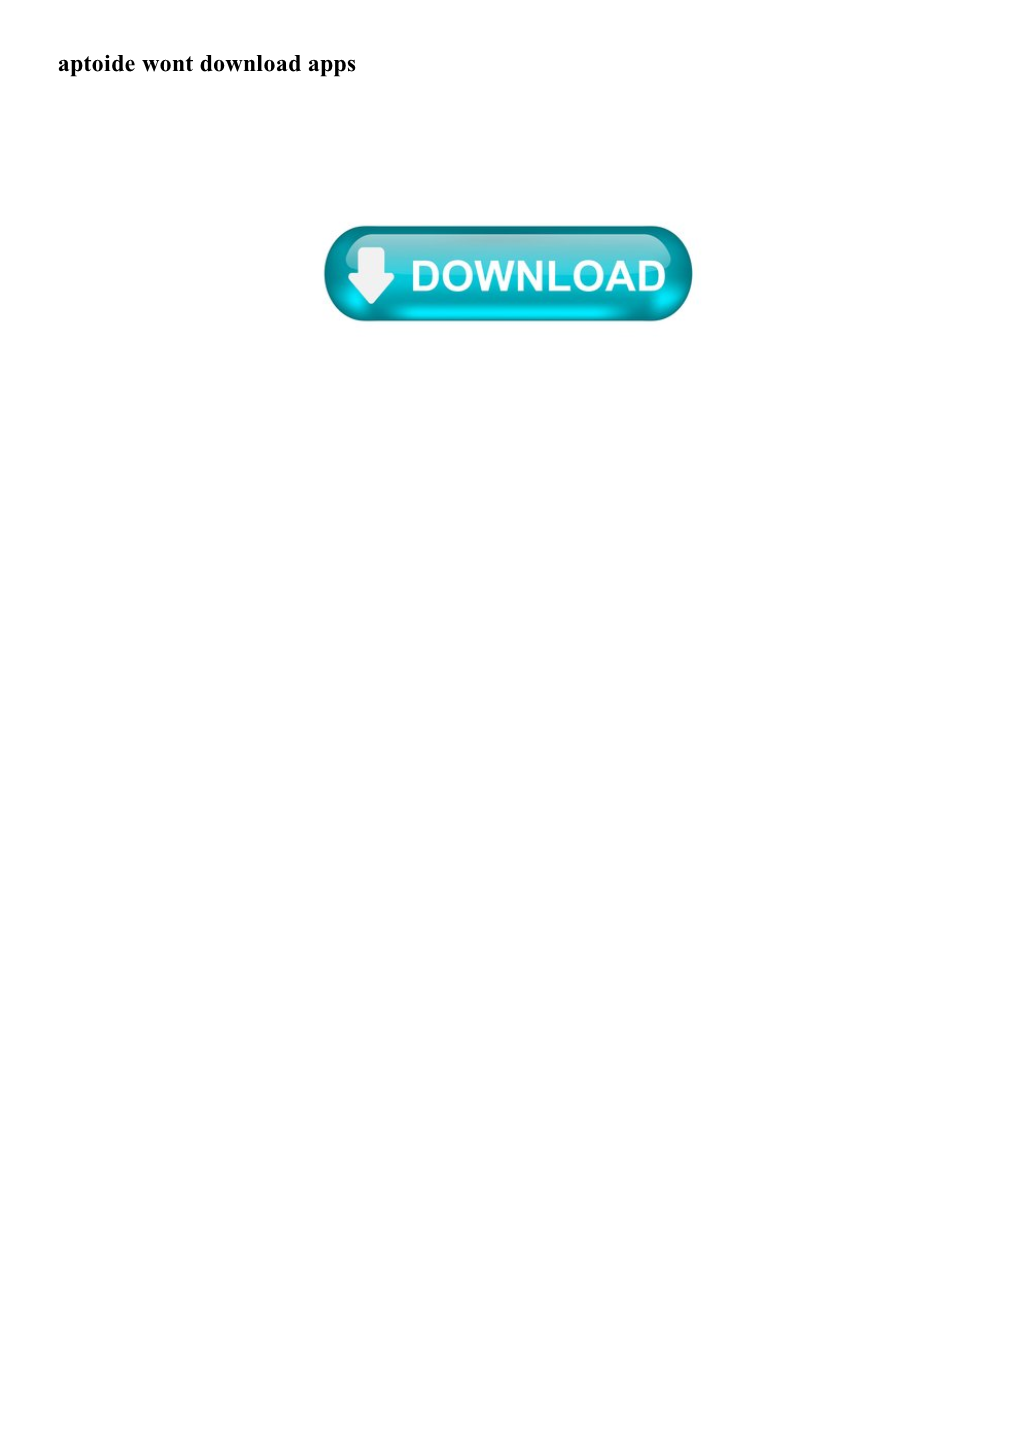 Aptoide Wont Download Apps How to Fix Aptoide If You Can't Download Apps